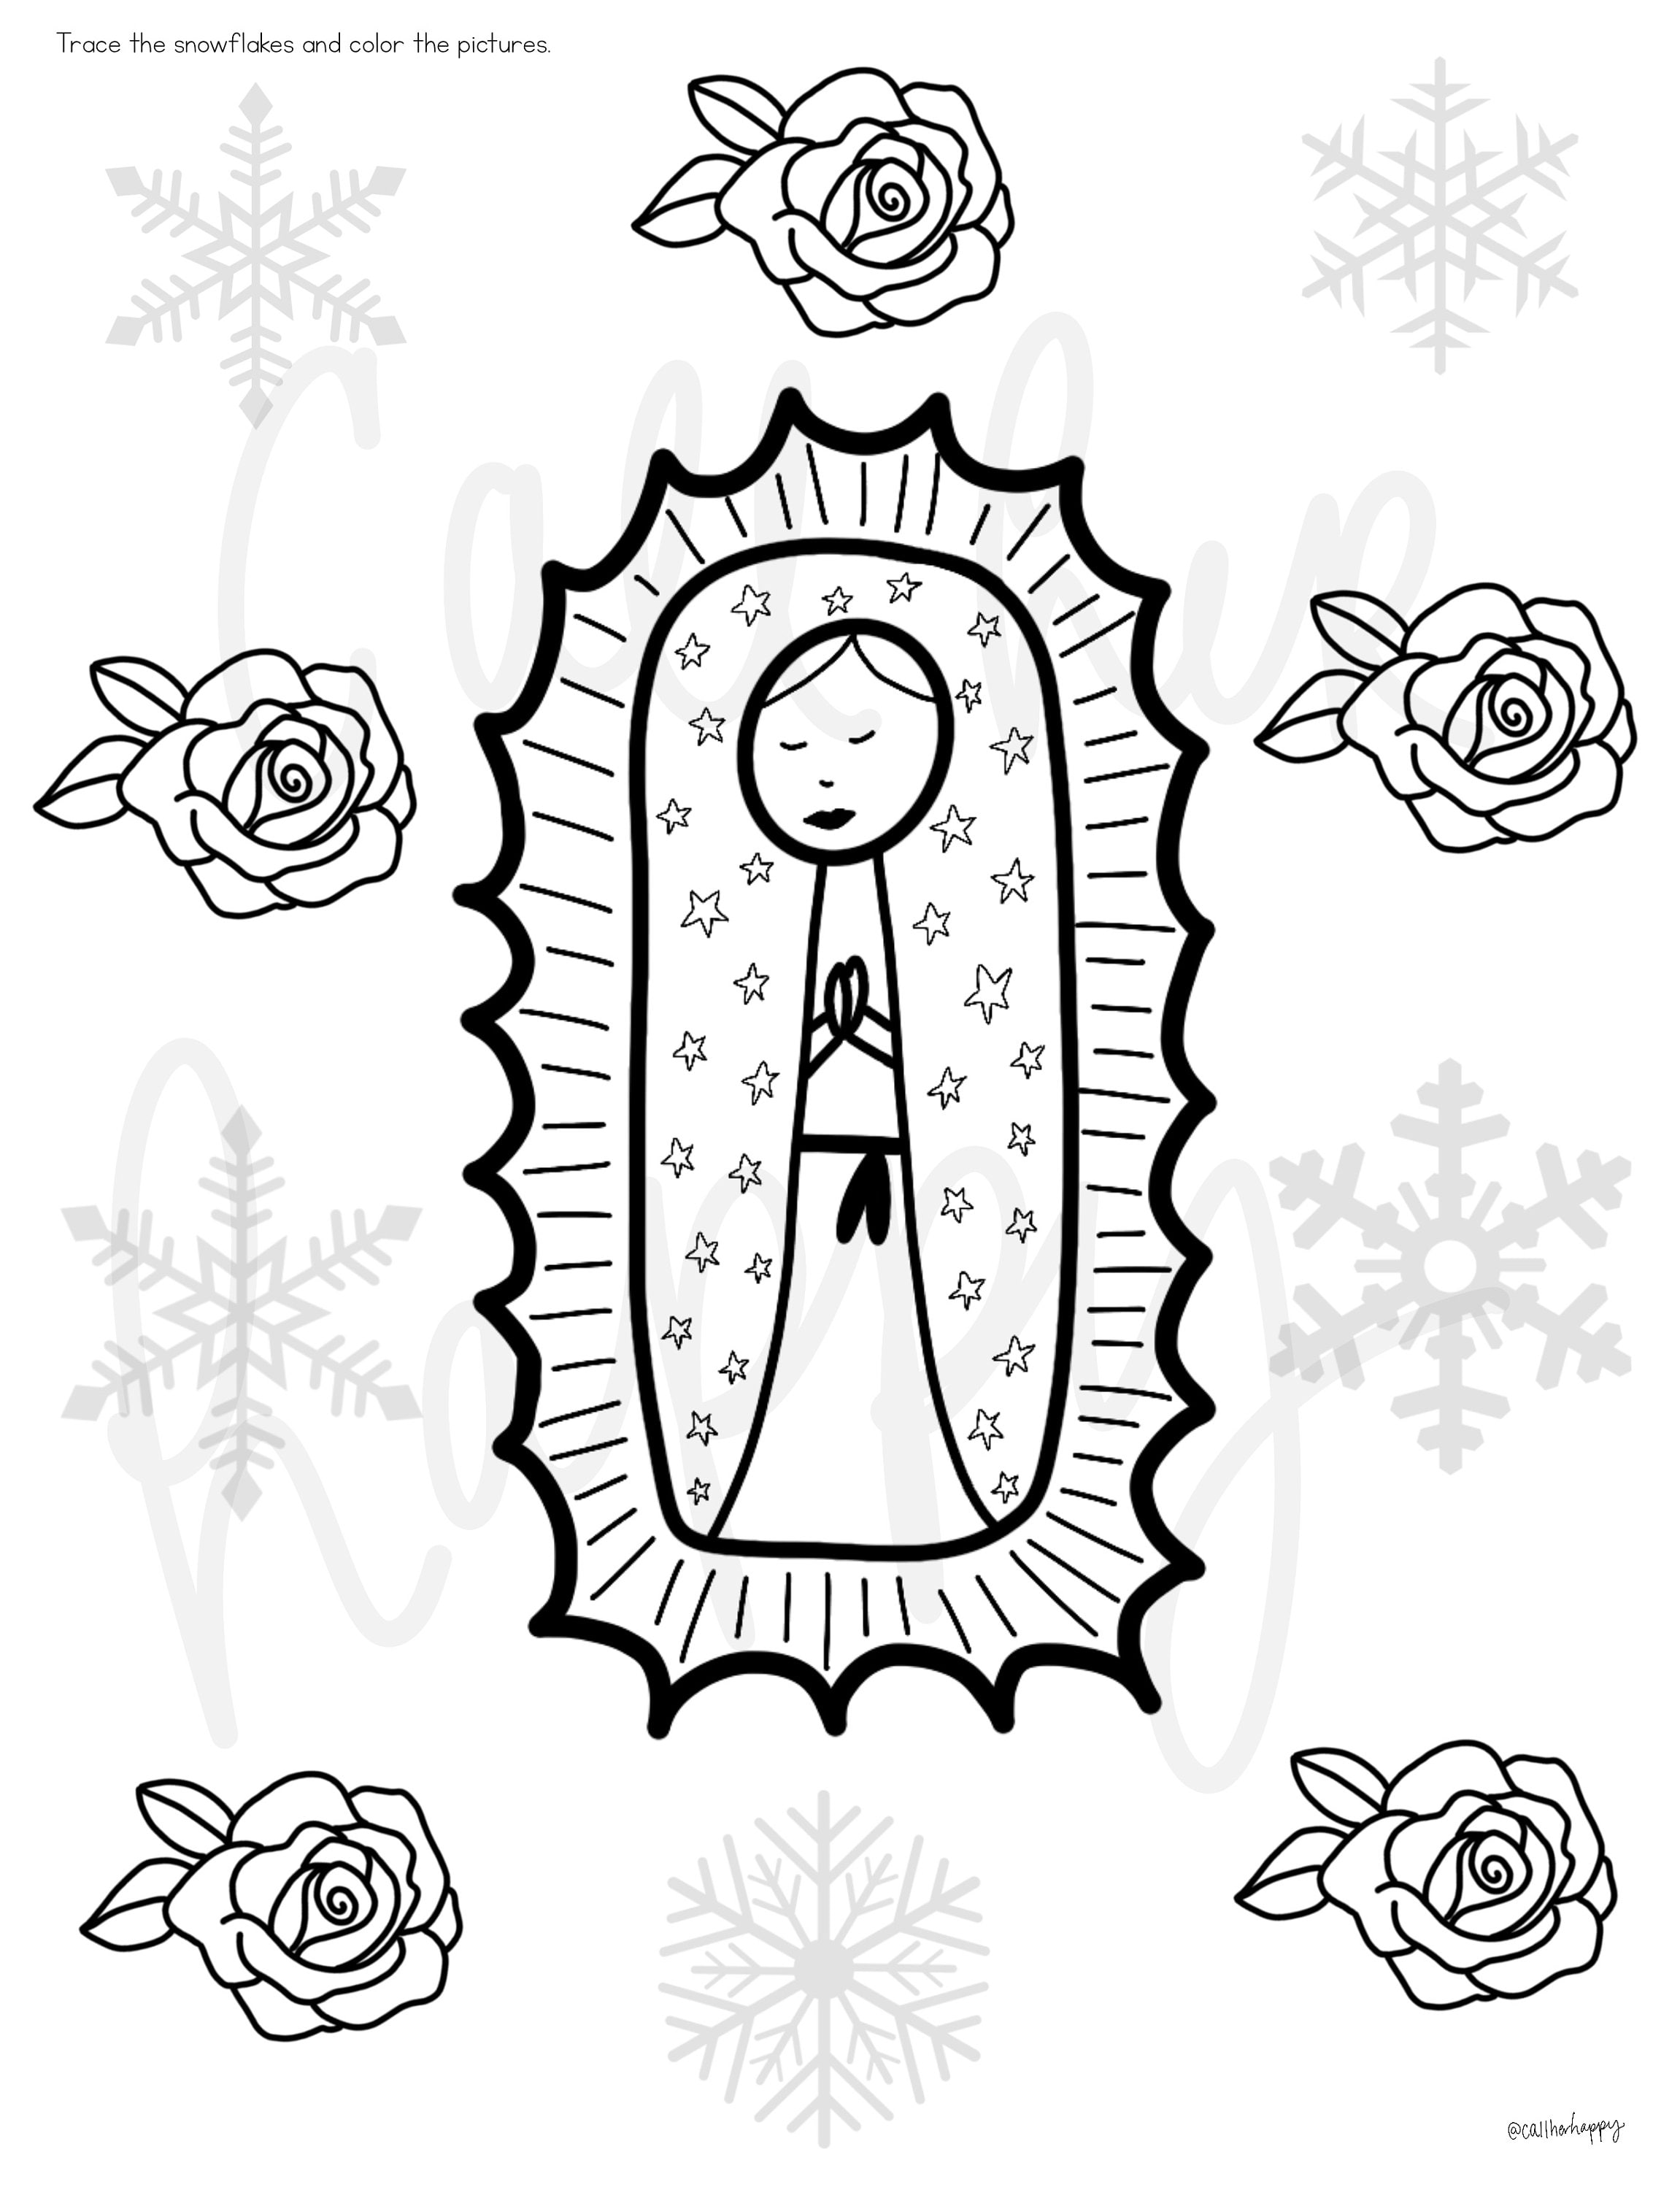 Our lady of guadalupe printable coloring page sheet lazy liturgical year catholic resources for kids feast day prayer activities jesus